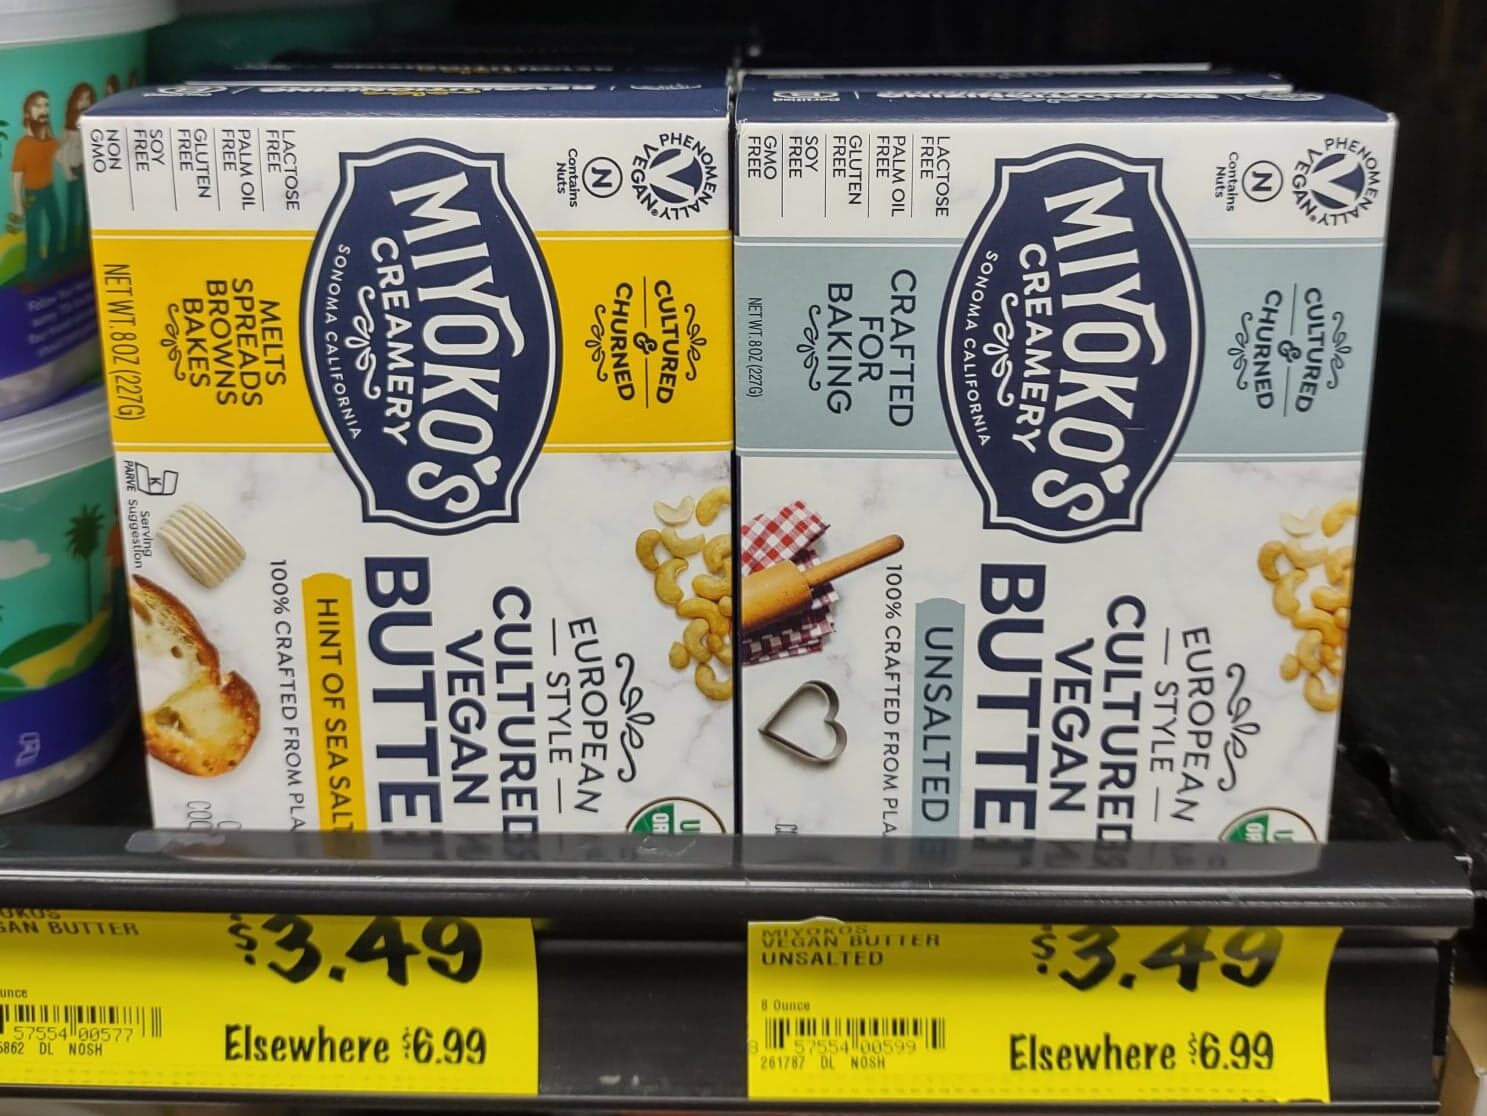 Miyoko's vegan butters marked $3.49 at Grocery Outlet